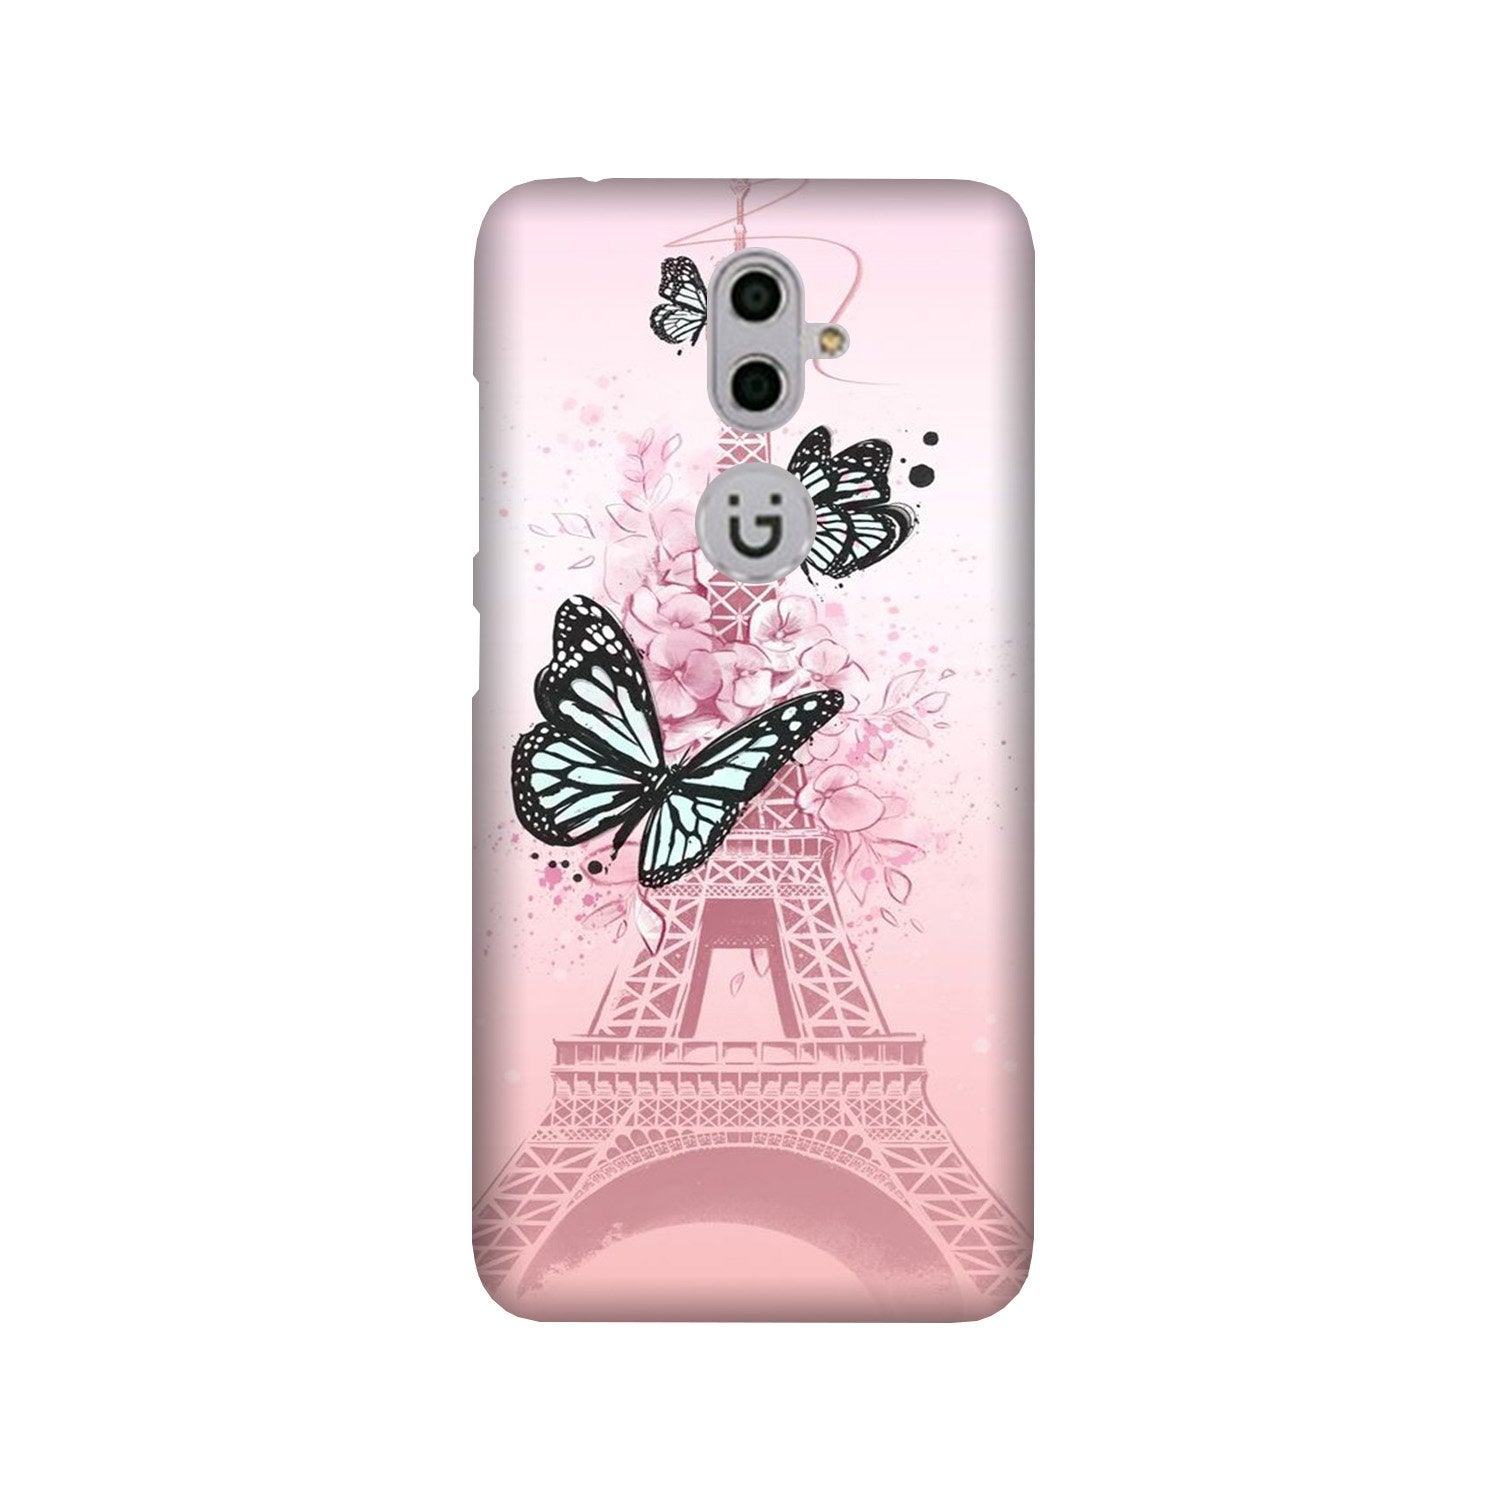 Eiffel Tower Case for Gionee S9 (Design No. 211)